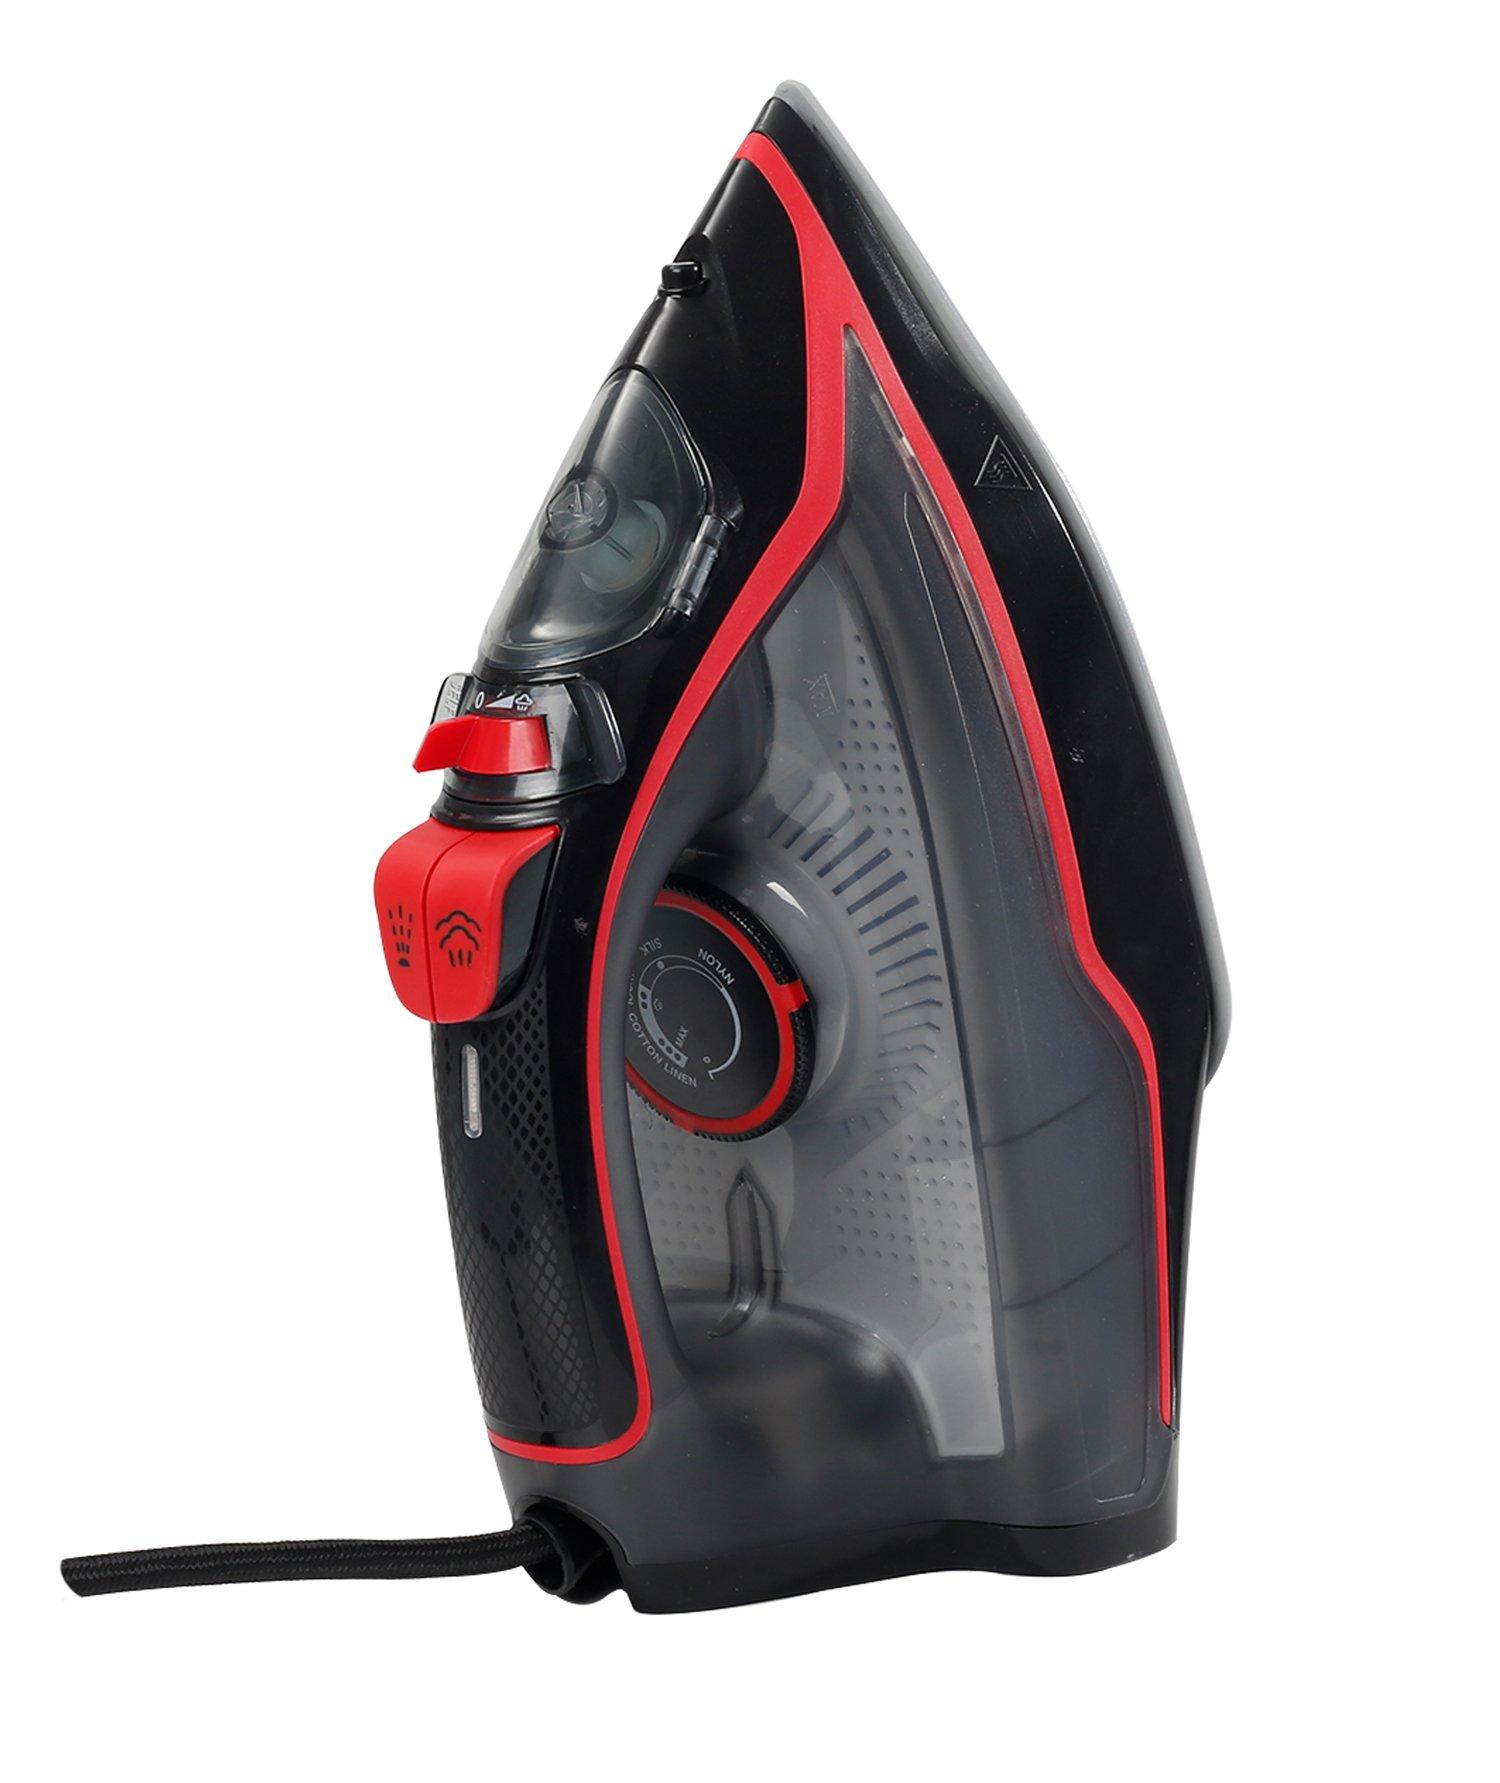 Clikon Steam Iron With Non-Stick Ceramic Soleplate 2400W Red/Black ...